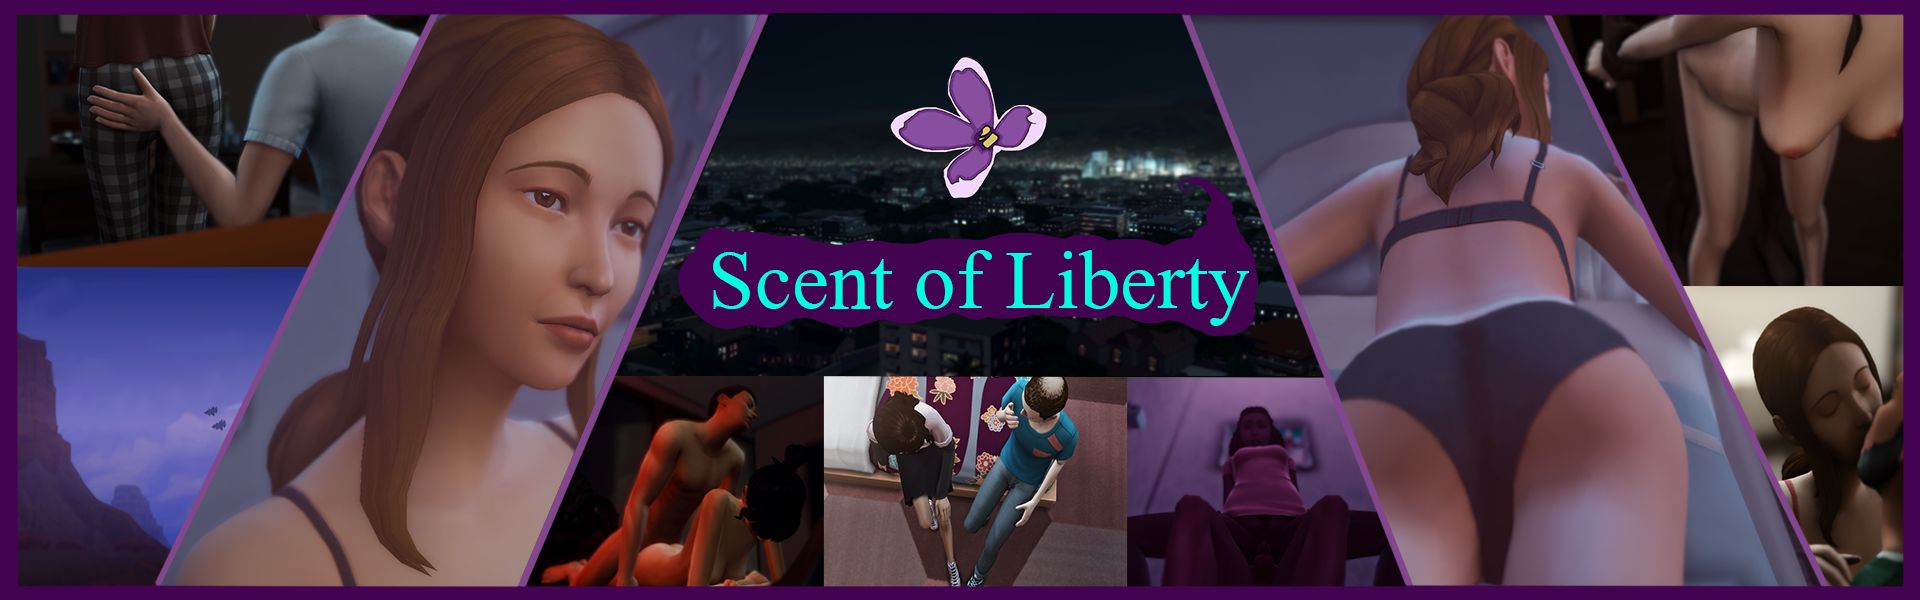 Scent of Liberty [Unchaste Acts] Adult xxx Game Download